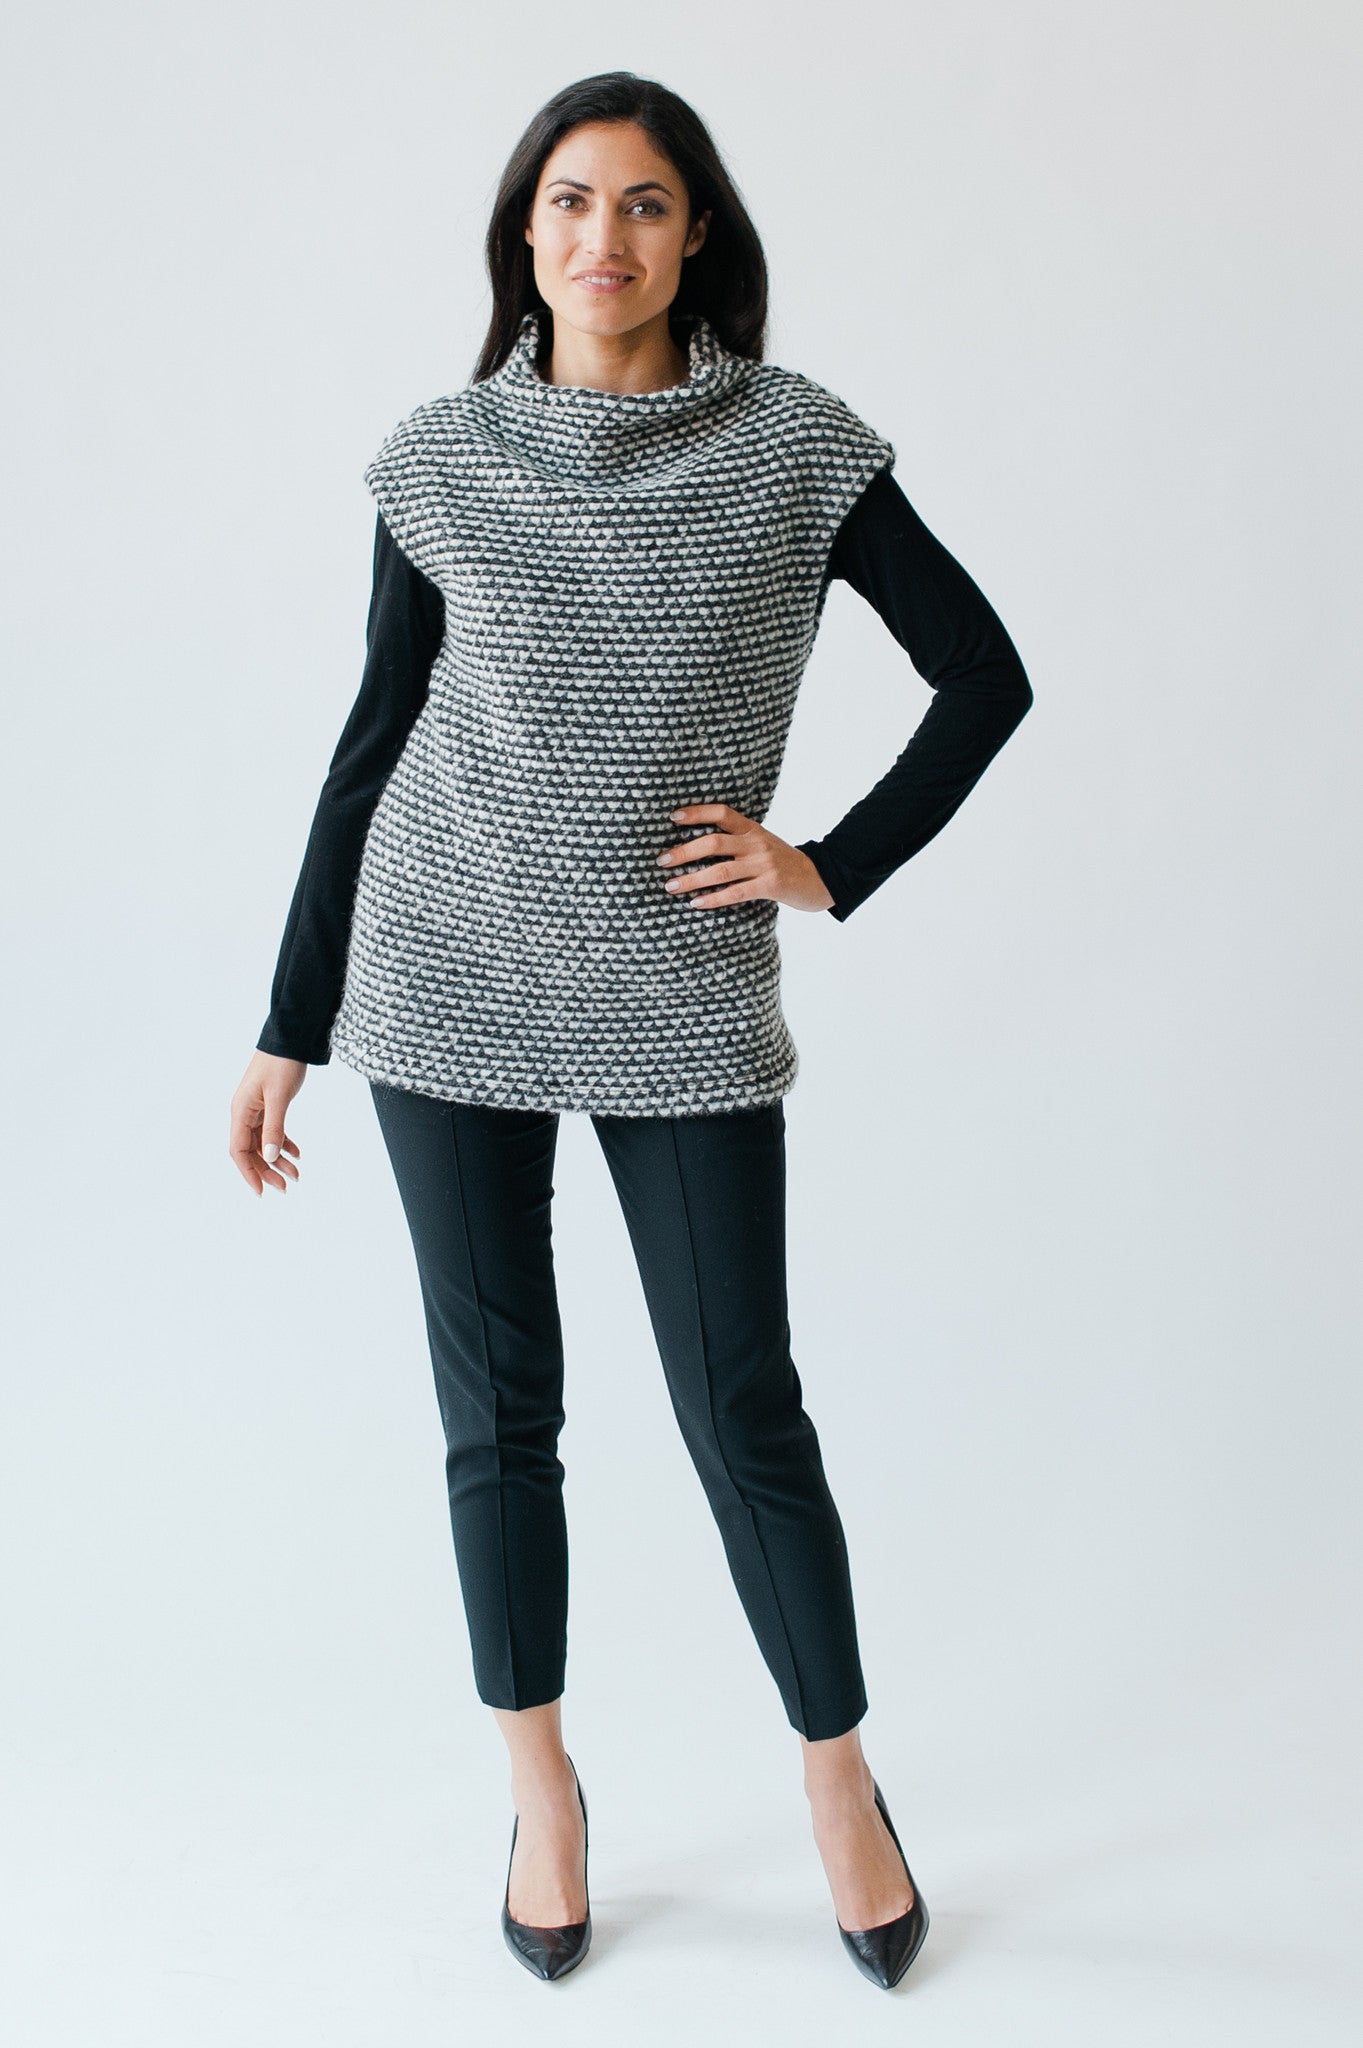 Sleeveless sweater in black and white with classic styling - Cocoon by ...